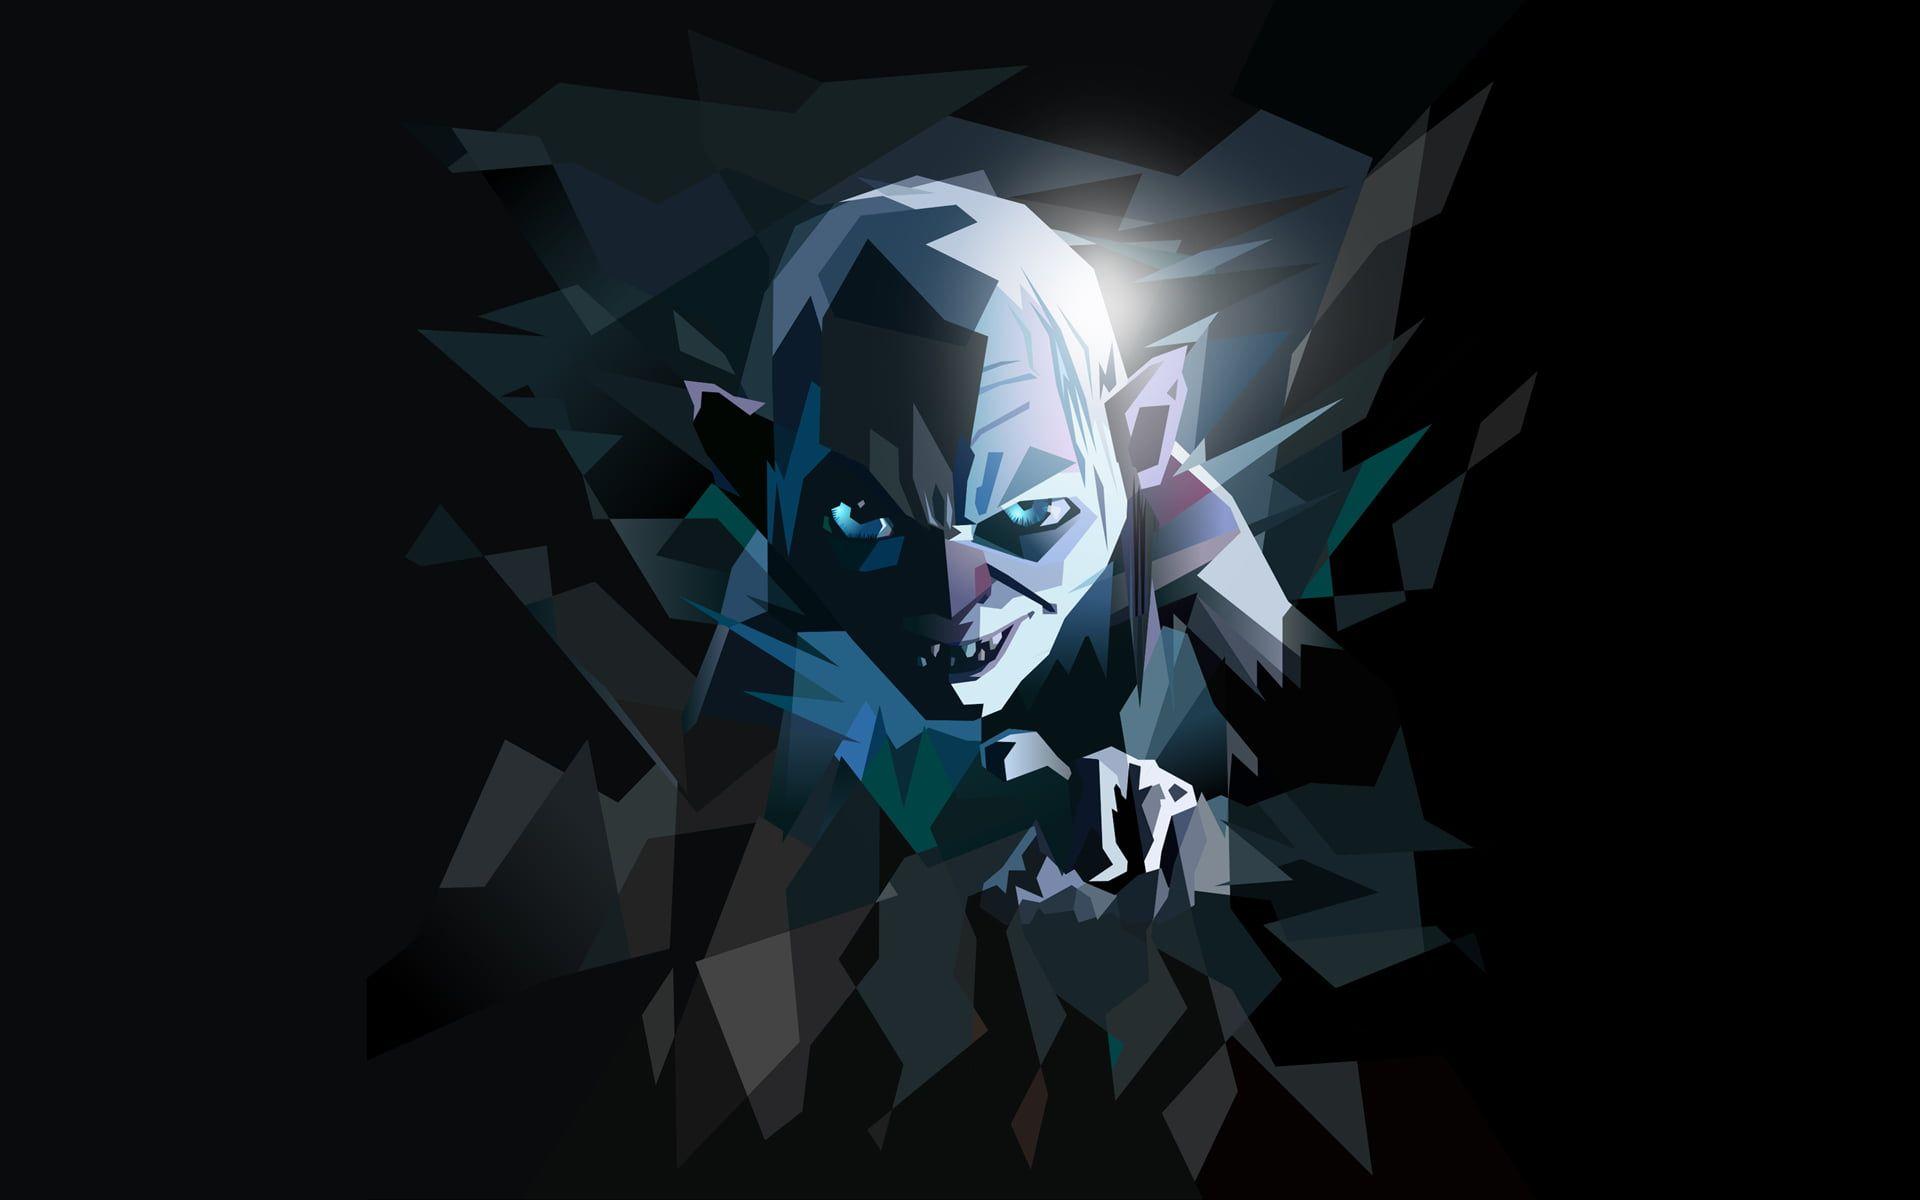 The Hobbit Smeagol artwork, The Lord of the Rings, The Hobbit